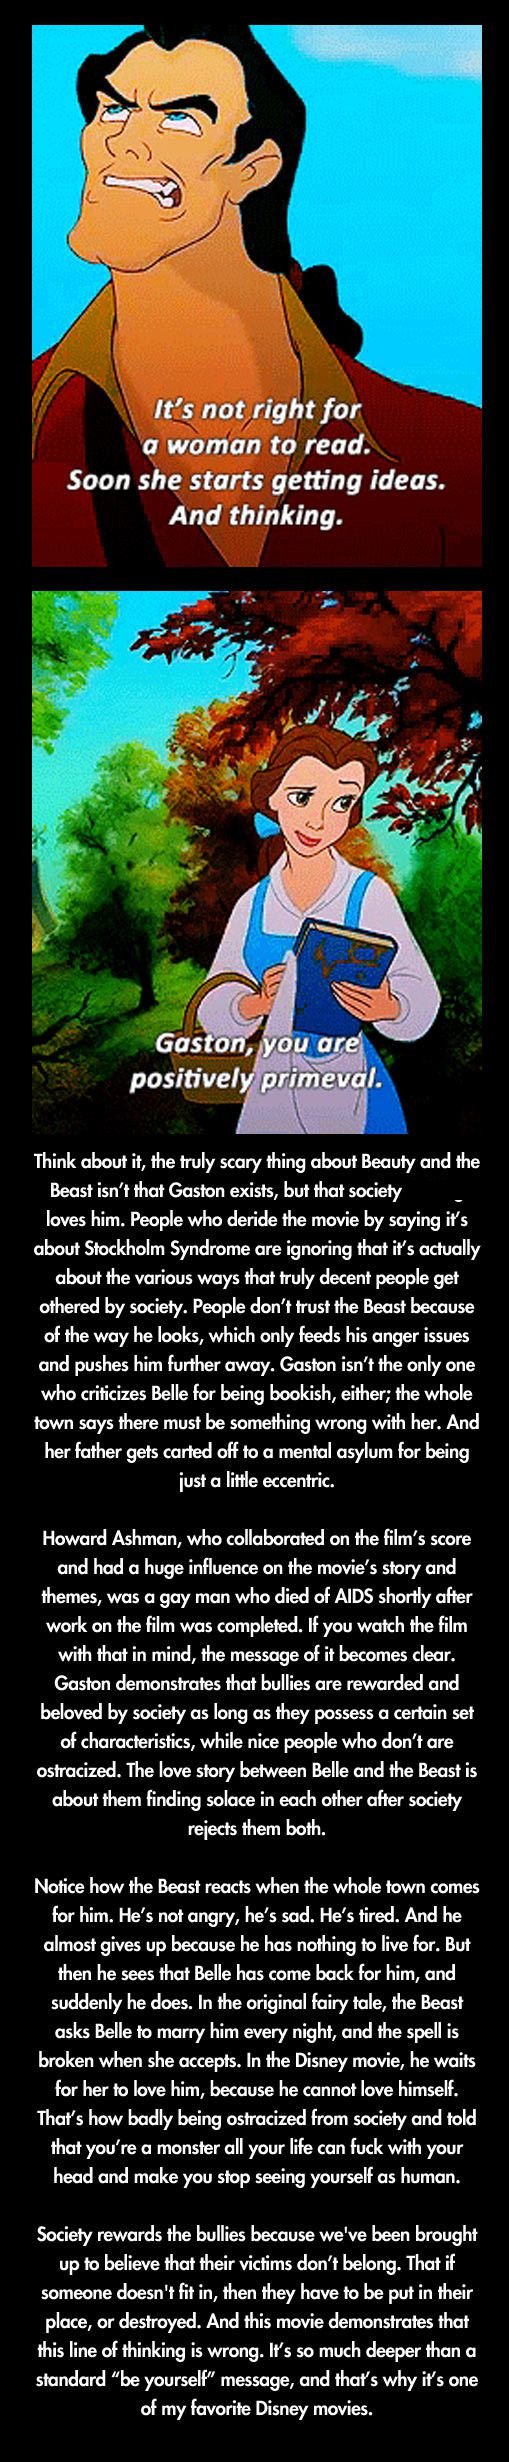 The scary thing about Beauty and the Beast.